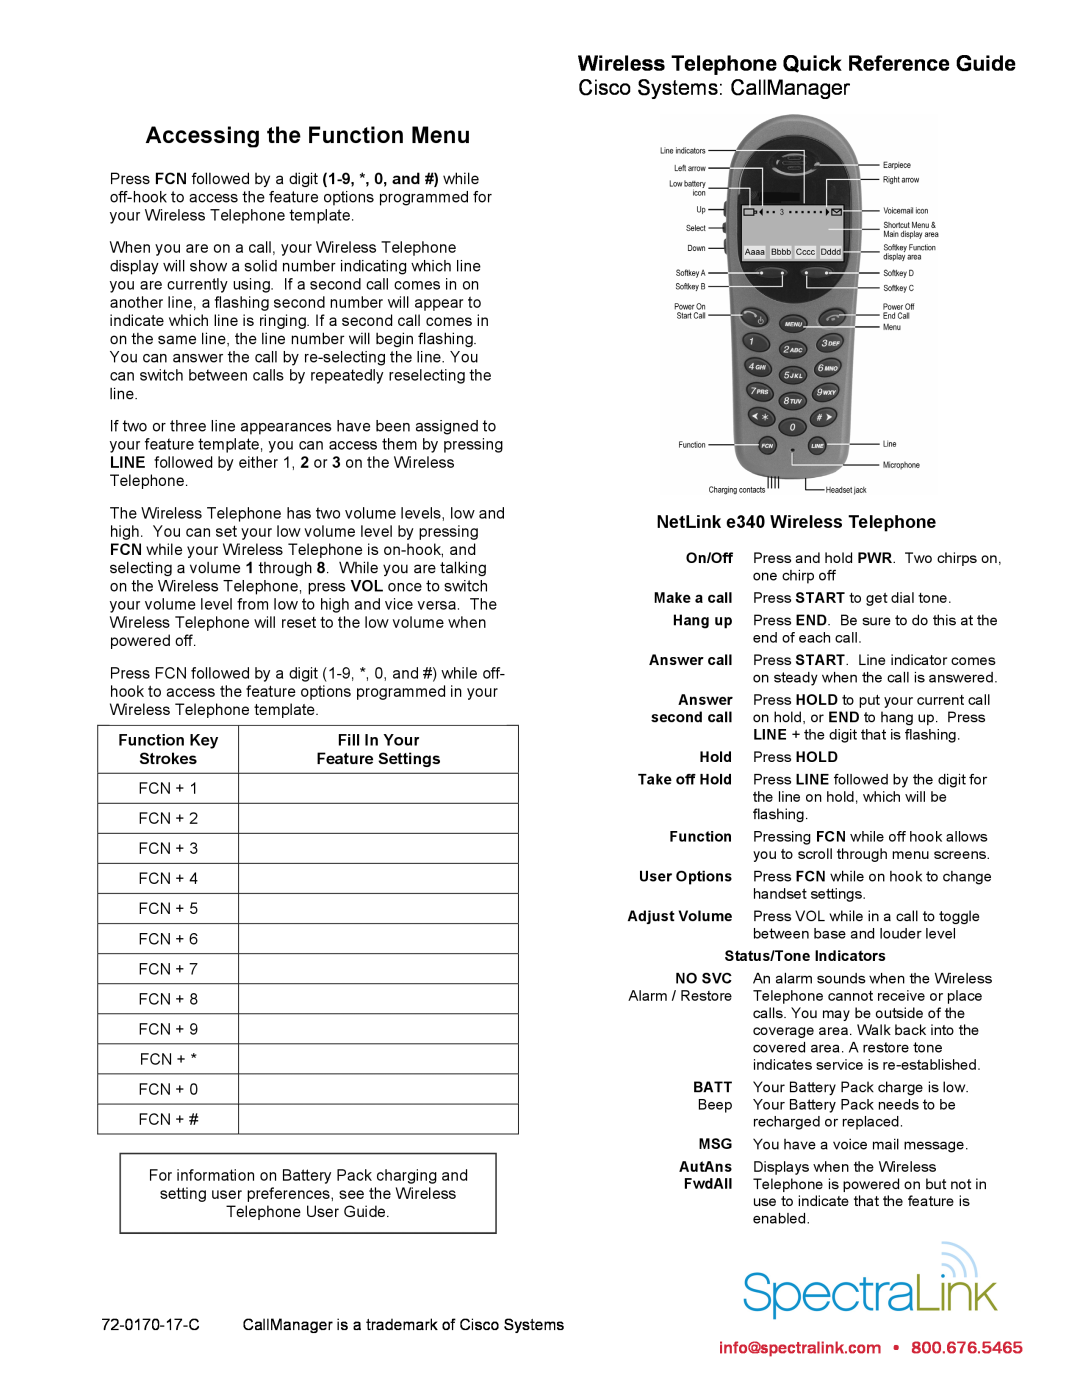 SpectraLink E340 manual Accessing the Function Menu, Wireless Telephone Quick Reference Guide, Cisco Systems CallManager 